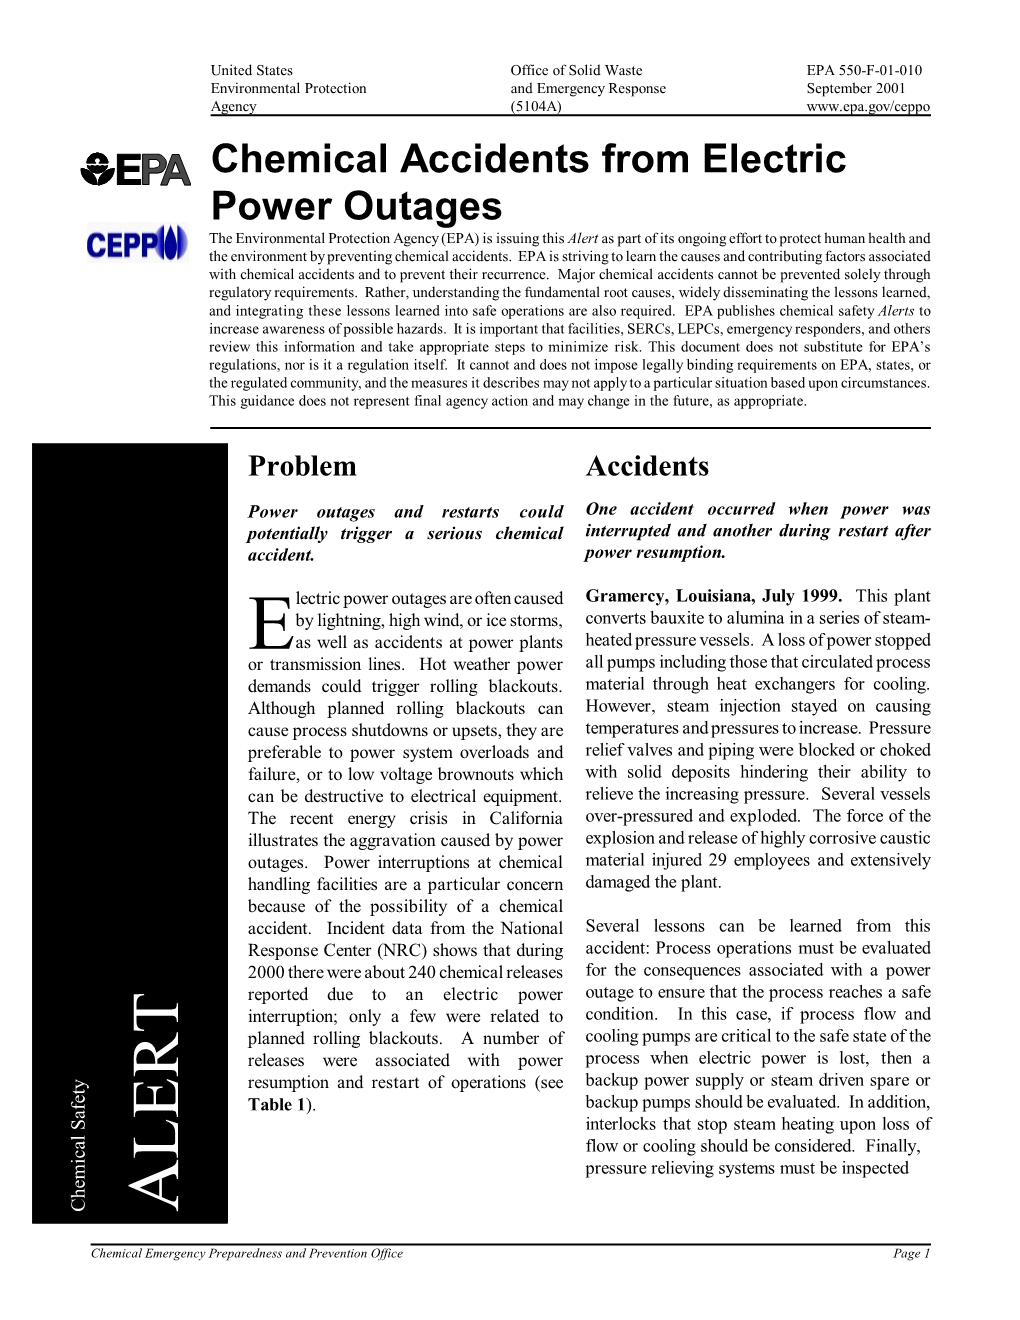 Chemical Accidents from Electric Power Outages